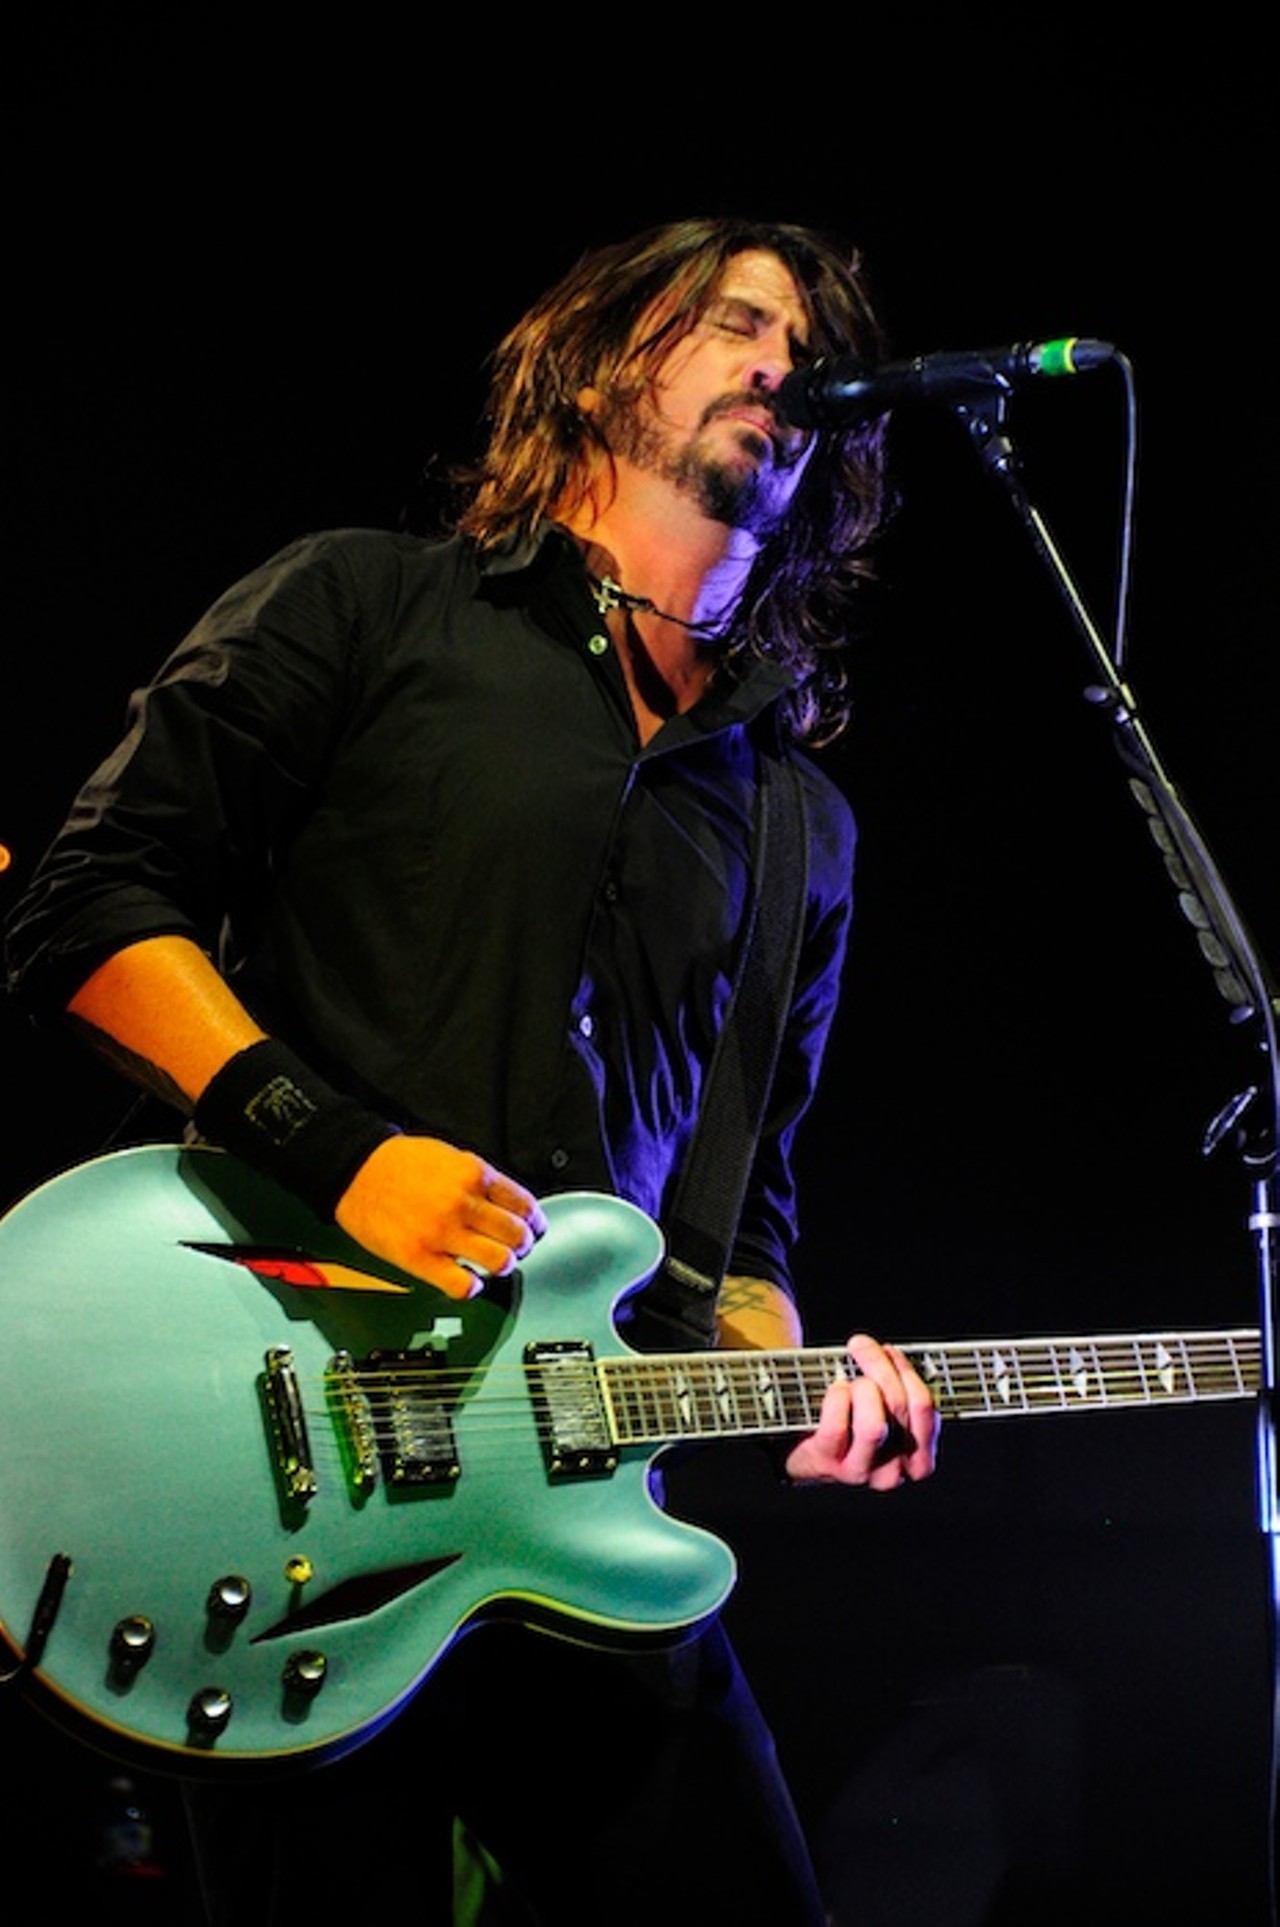 Foo Fighters at The Q